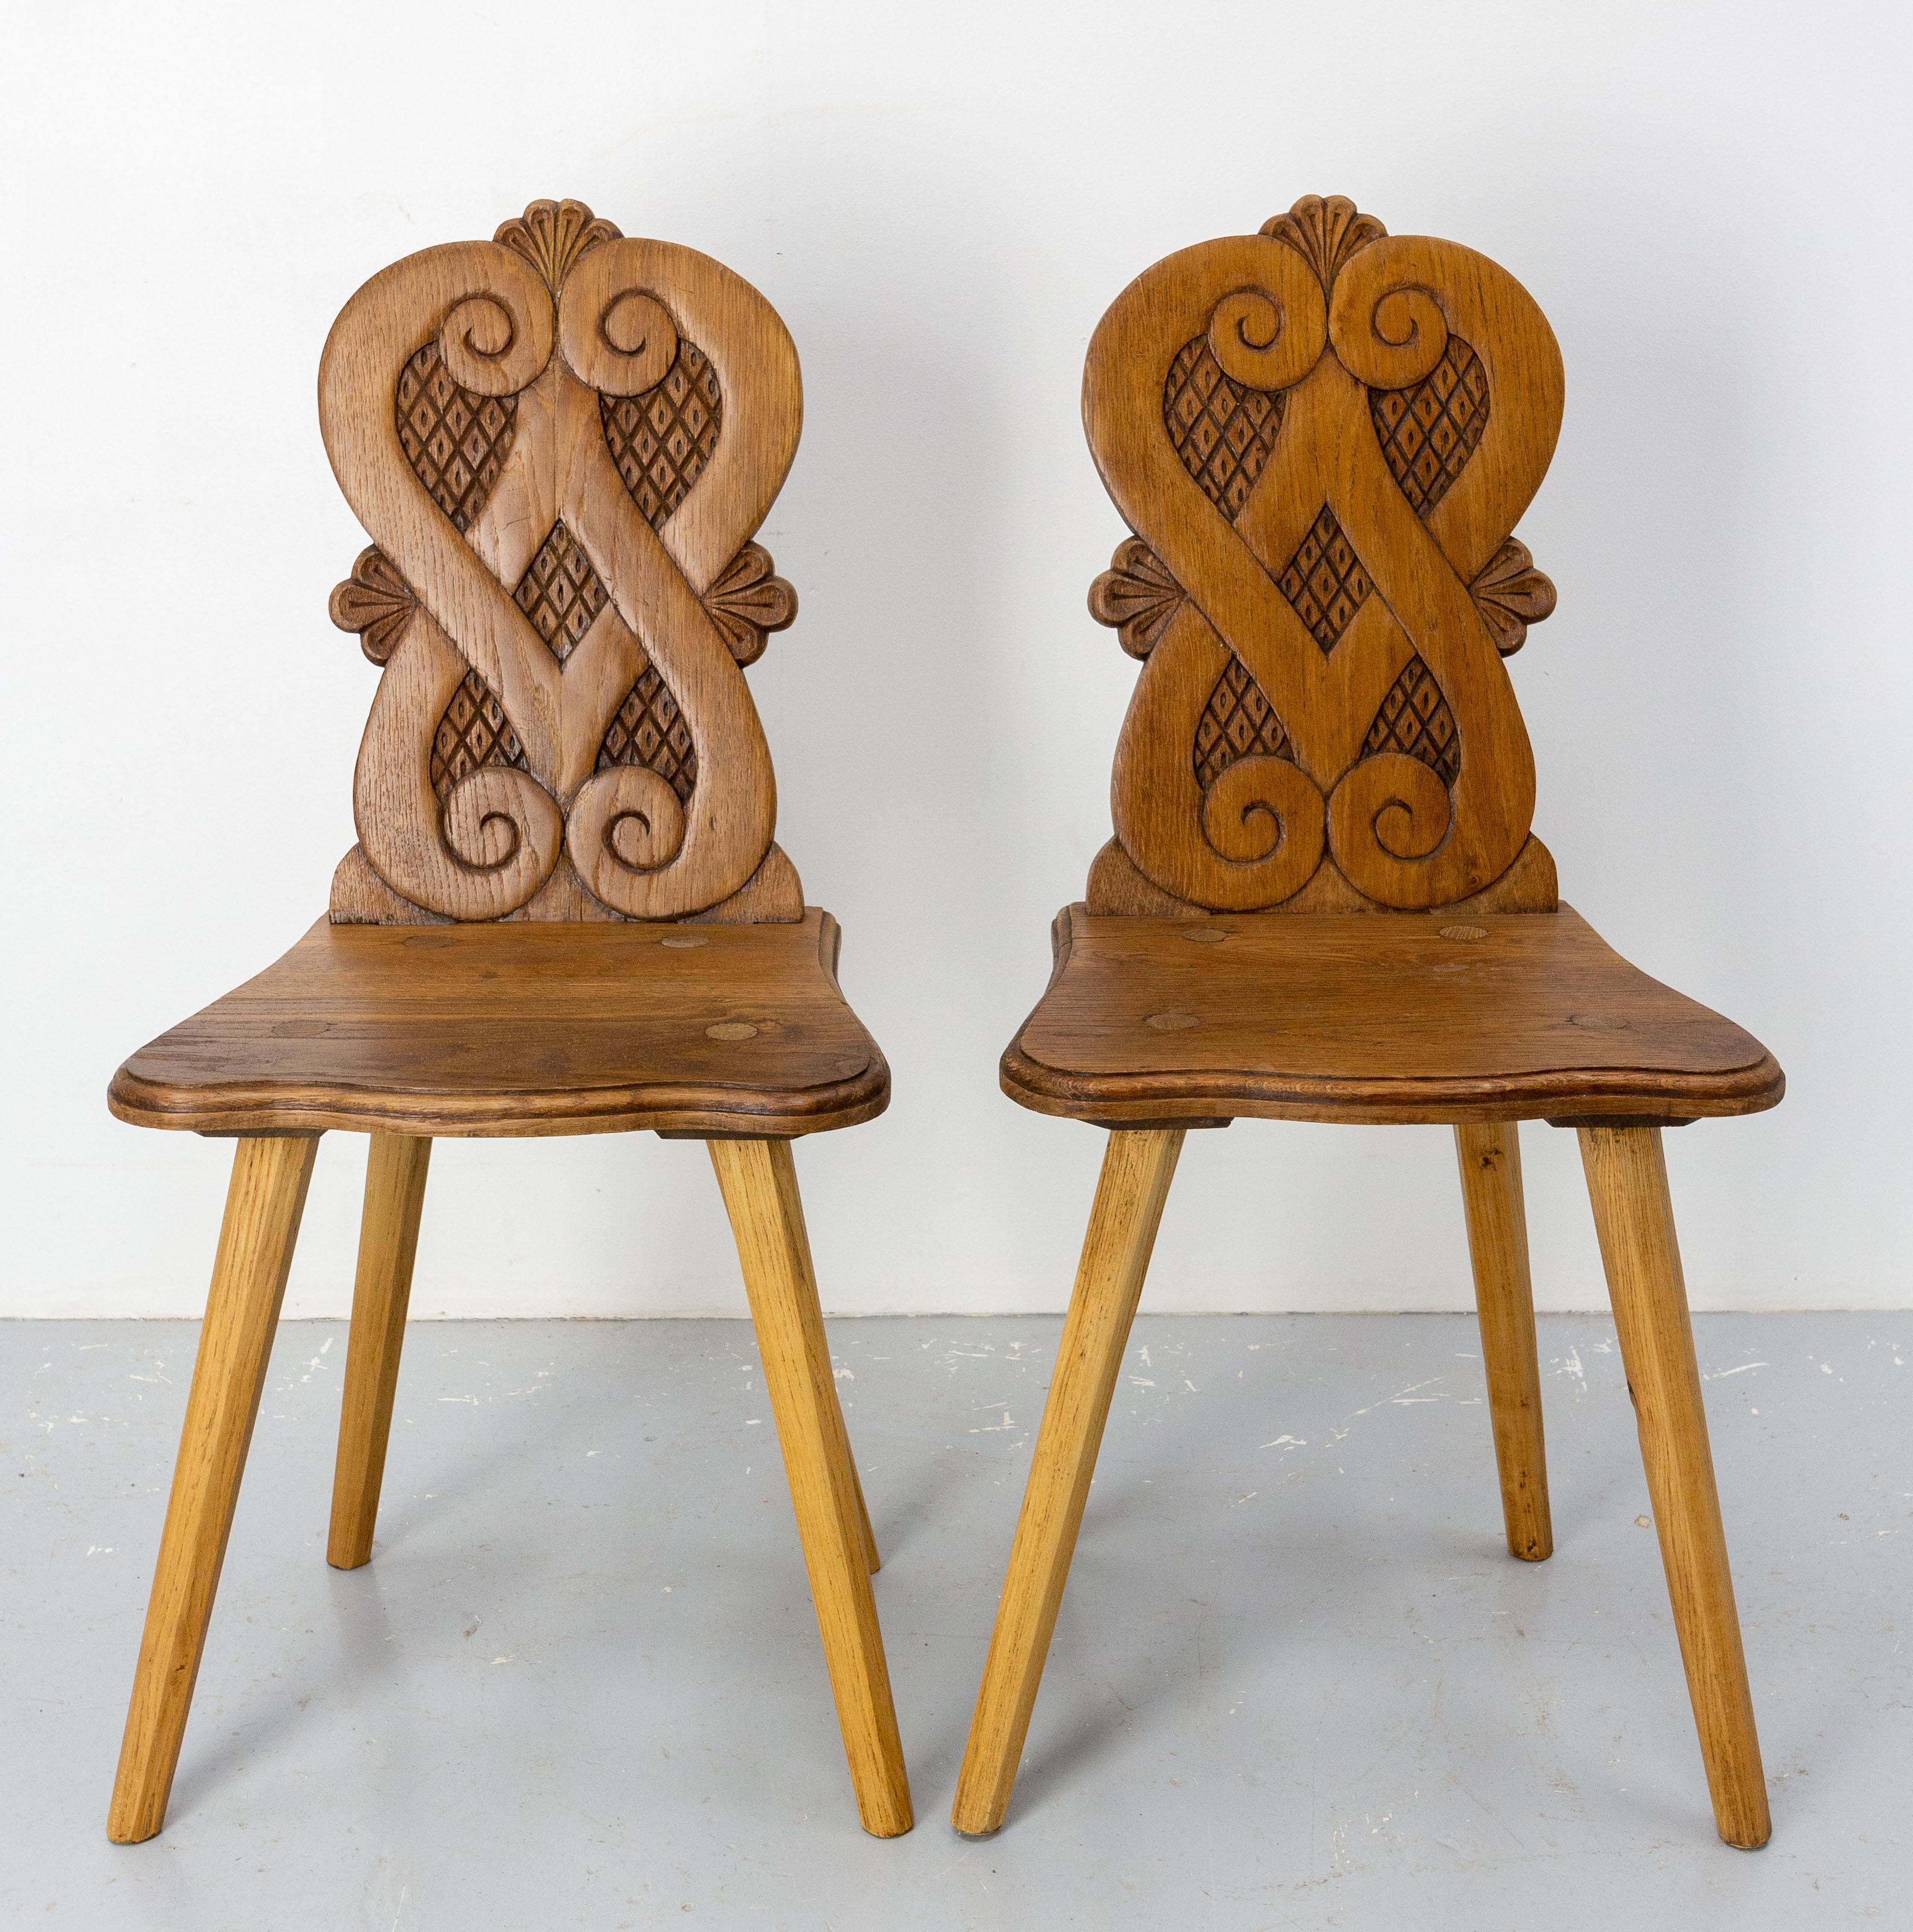 Pair of chairs, Swiss Alp escabelles in the brutalist style
French, late 19th century
Characterful
One of the chairs has a sapwood part on the back (see last photo) please ask if you want this one in your pair.
Good condition, solid and